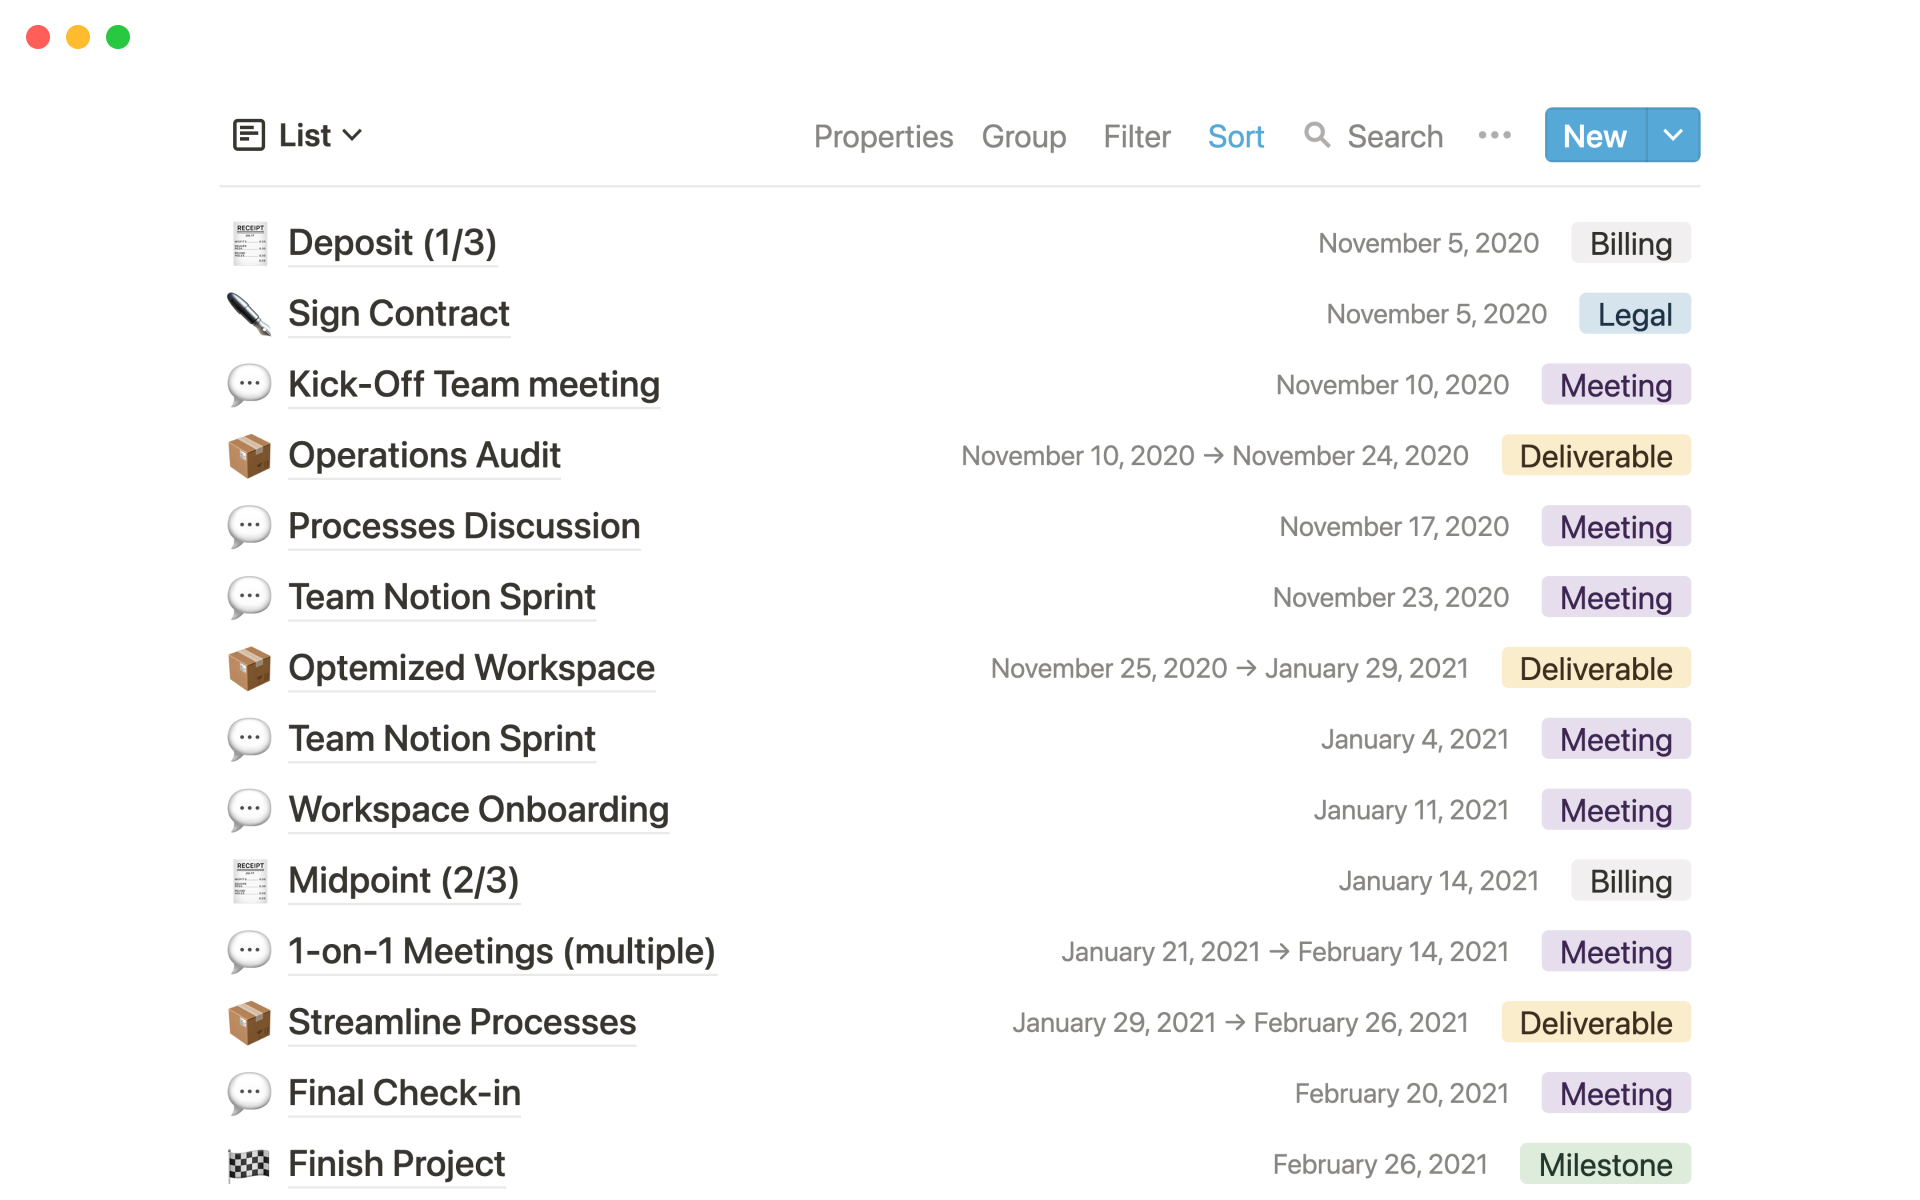 Spin up a schedule for complex, multi-month projects in minutes.